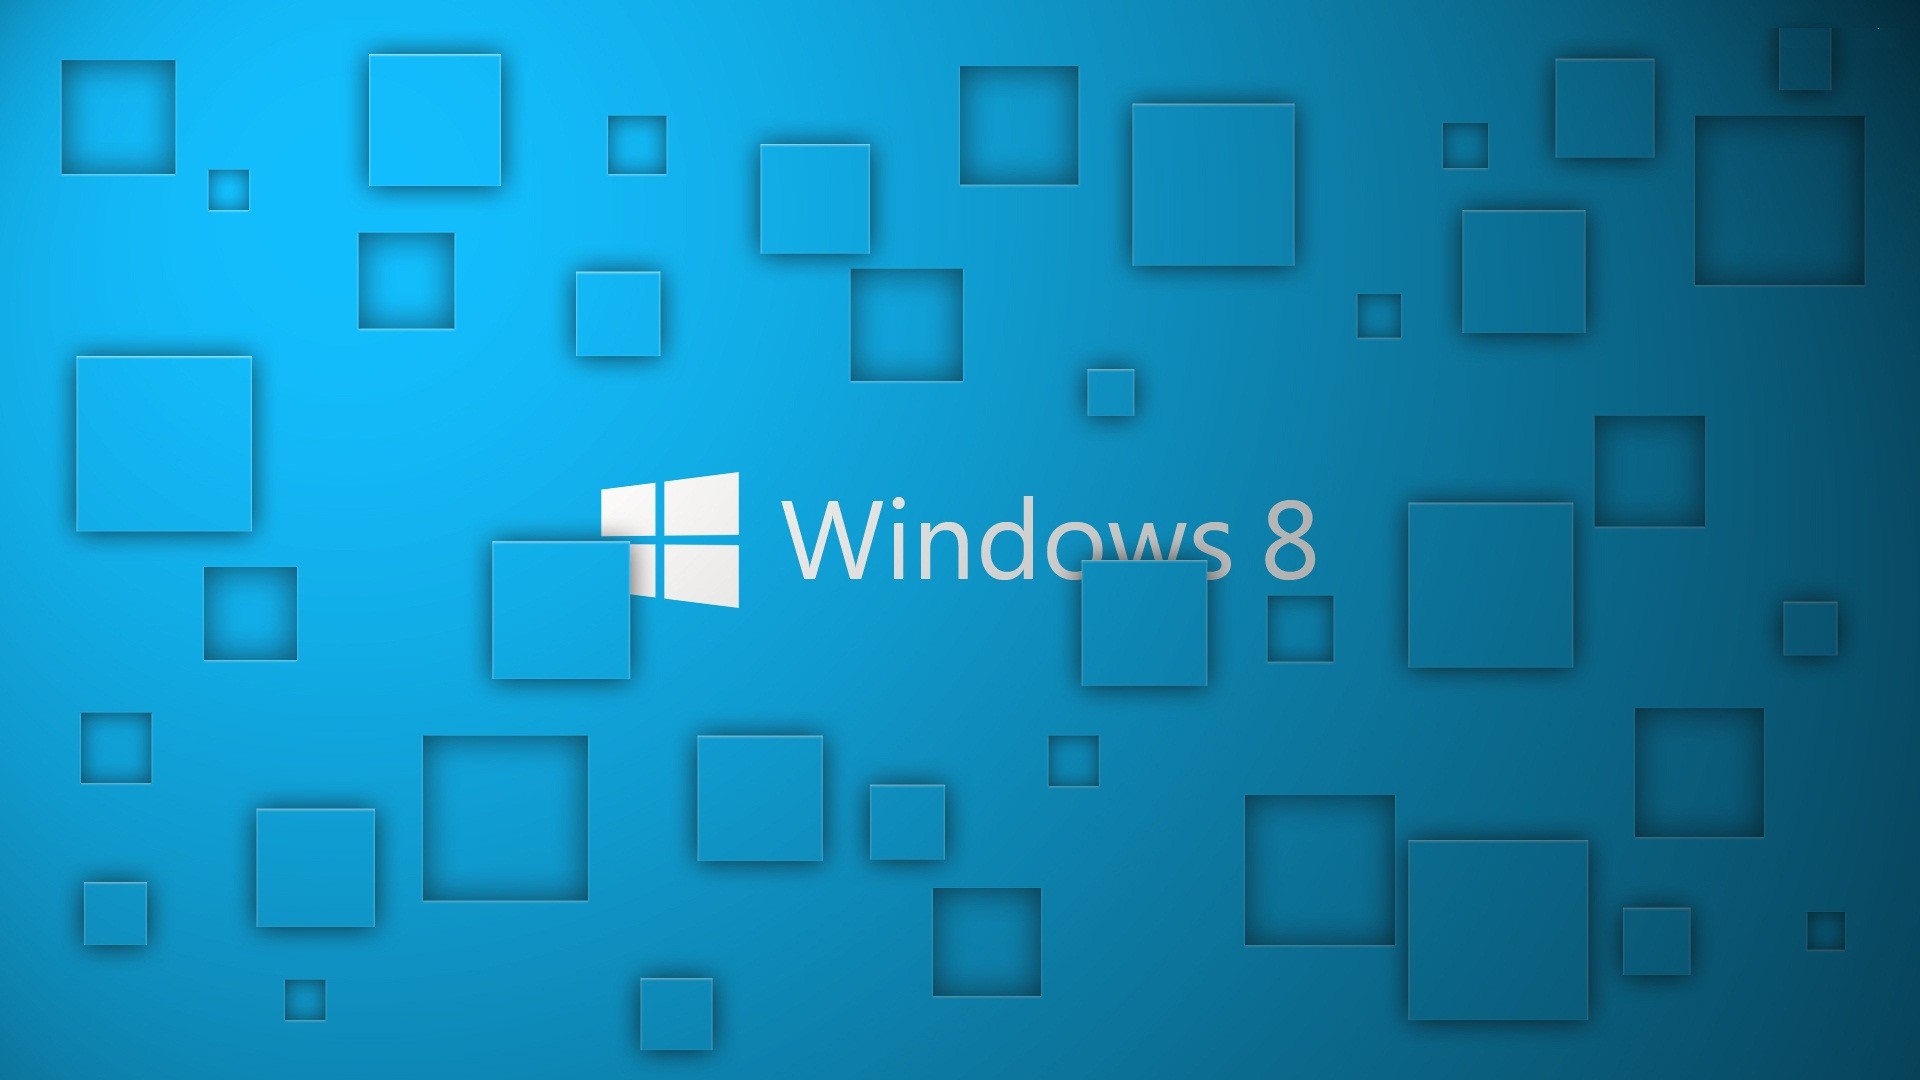 1920x1080 Windows 8 HD Wallpapers backgrounds.